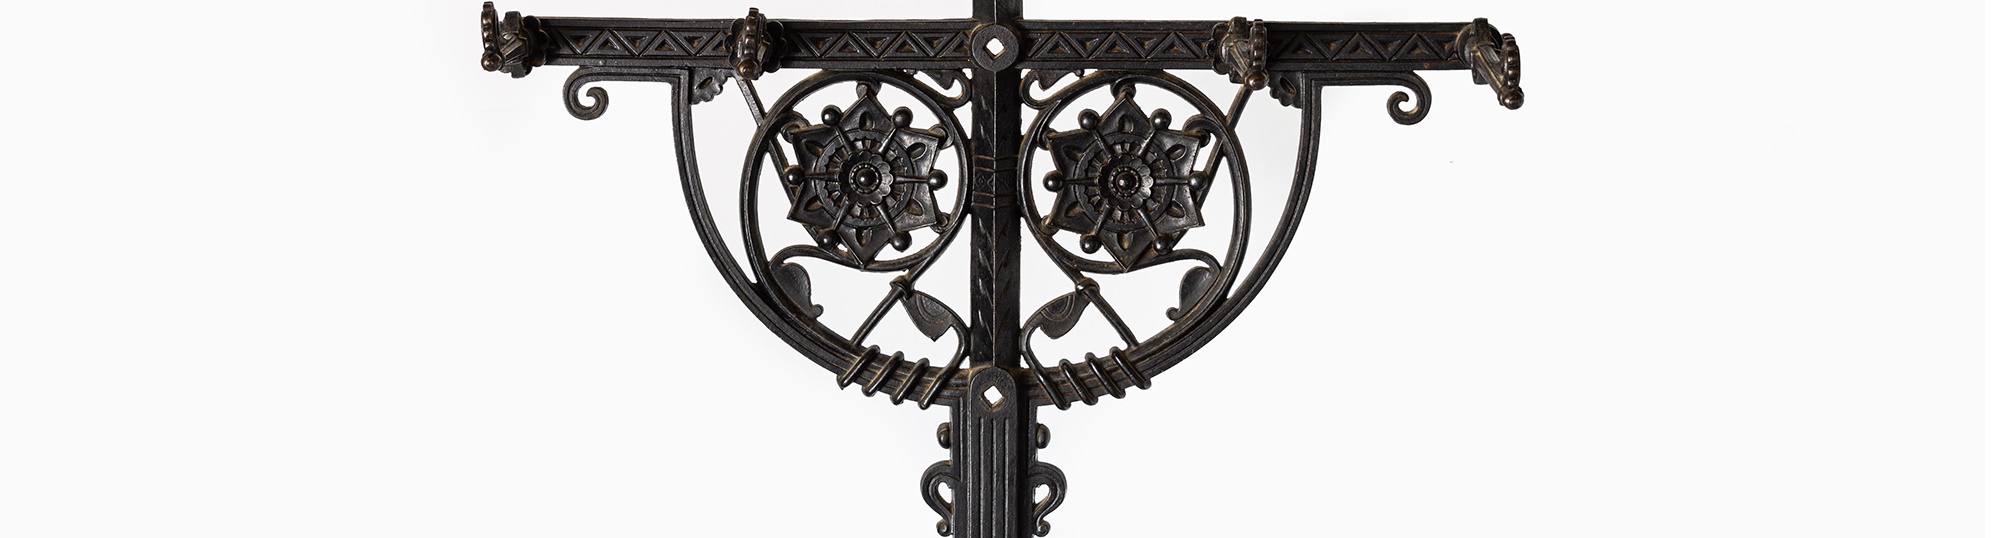 Christopher Dresser for Coalbrookdale wrought iron hall stand